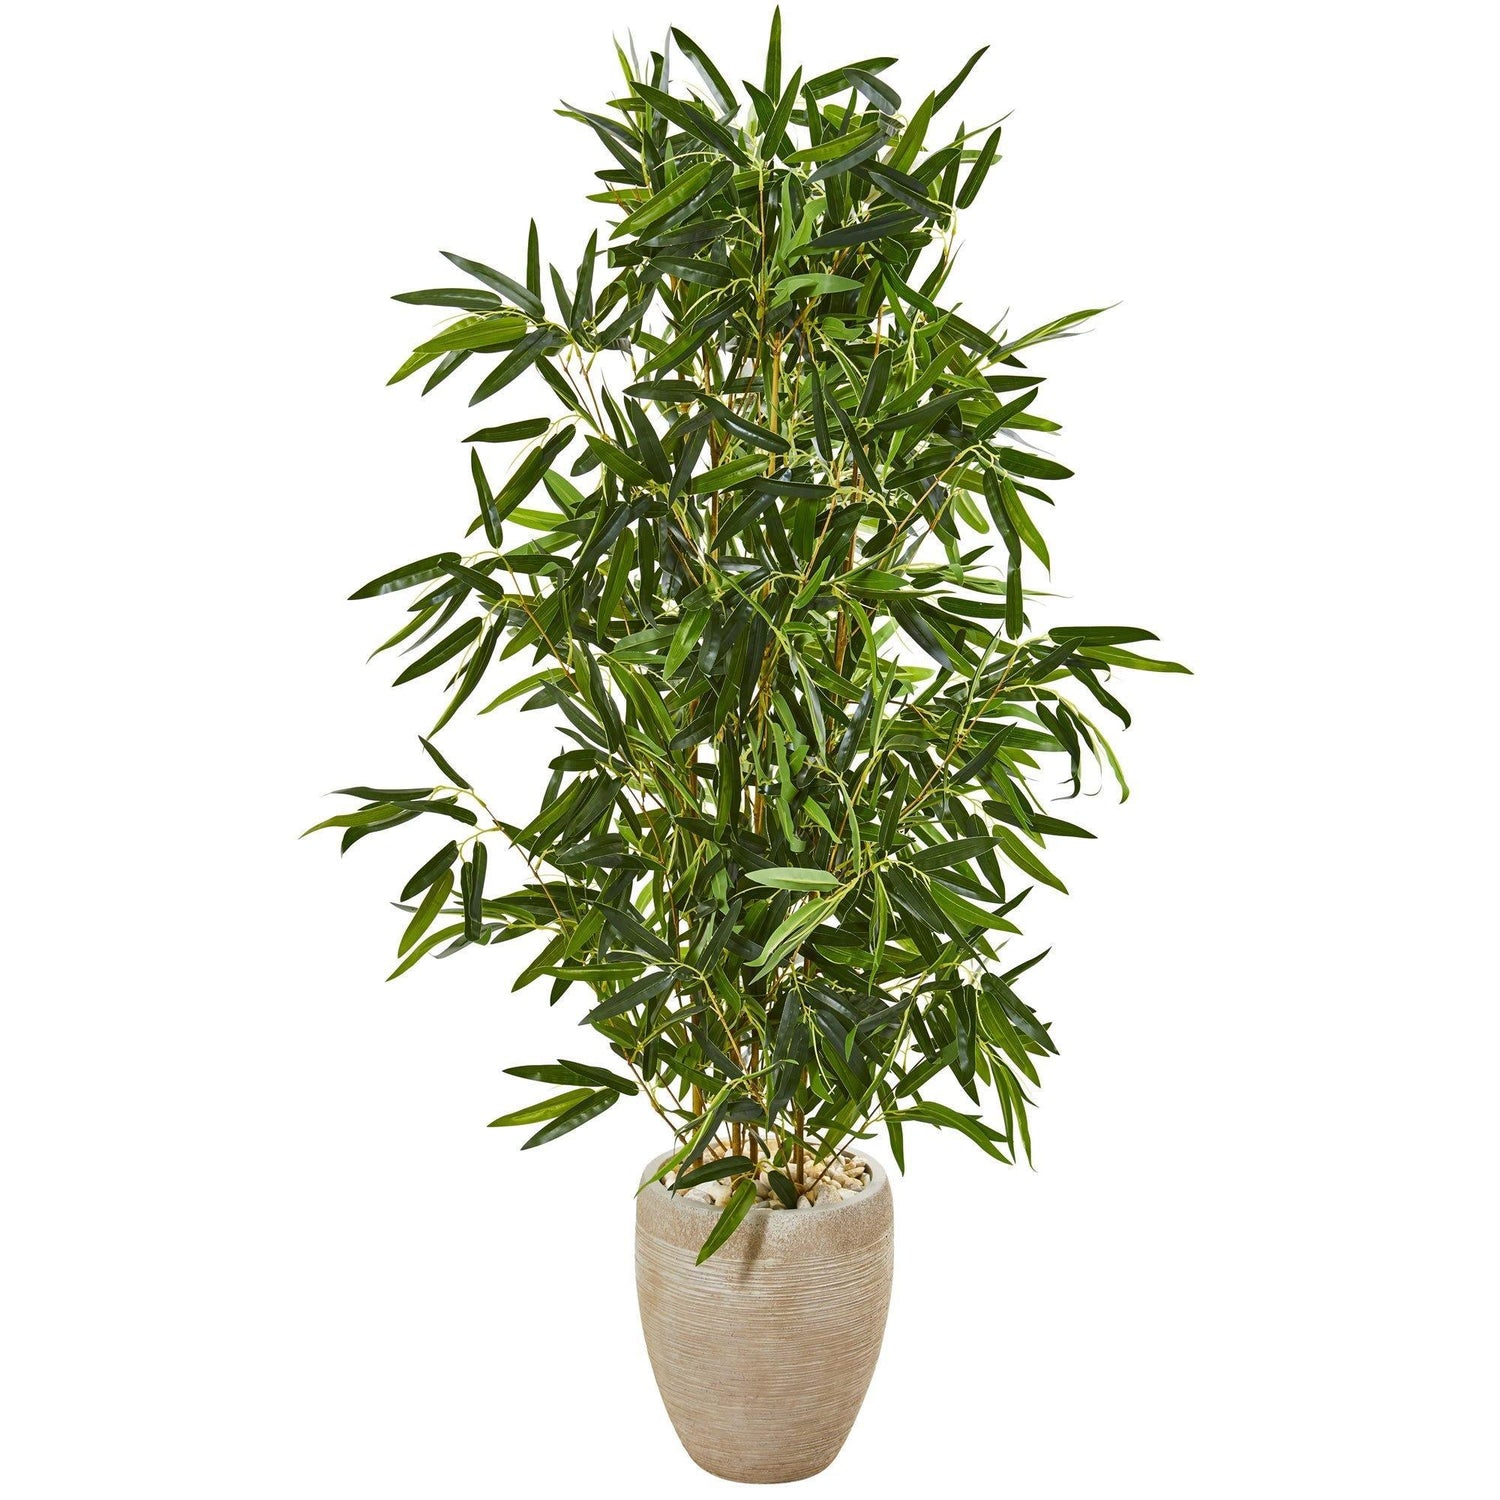 5’ Bamboo Artificial Tree in Sand Colored Planter (Real Touch)  (Indoor/Outdoor)